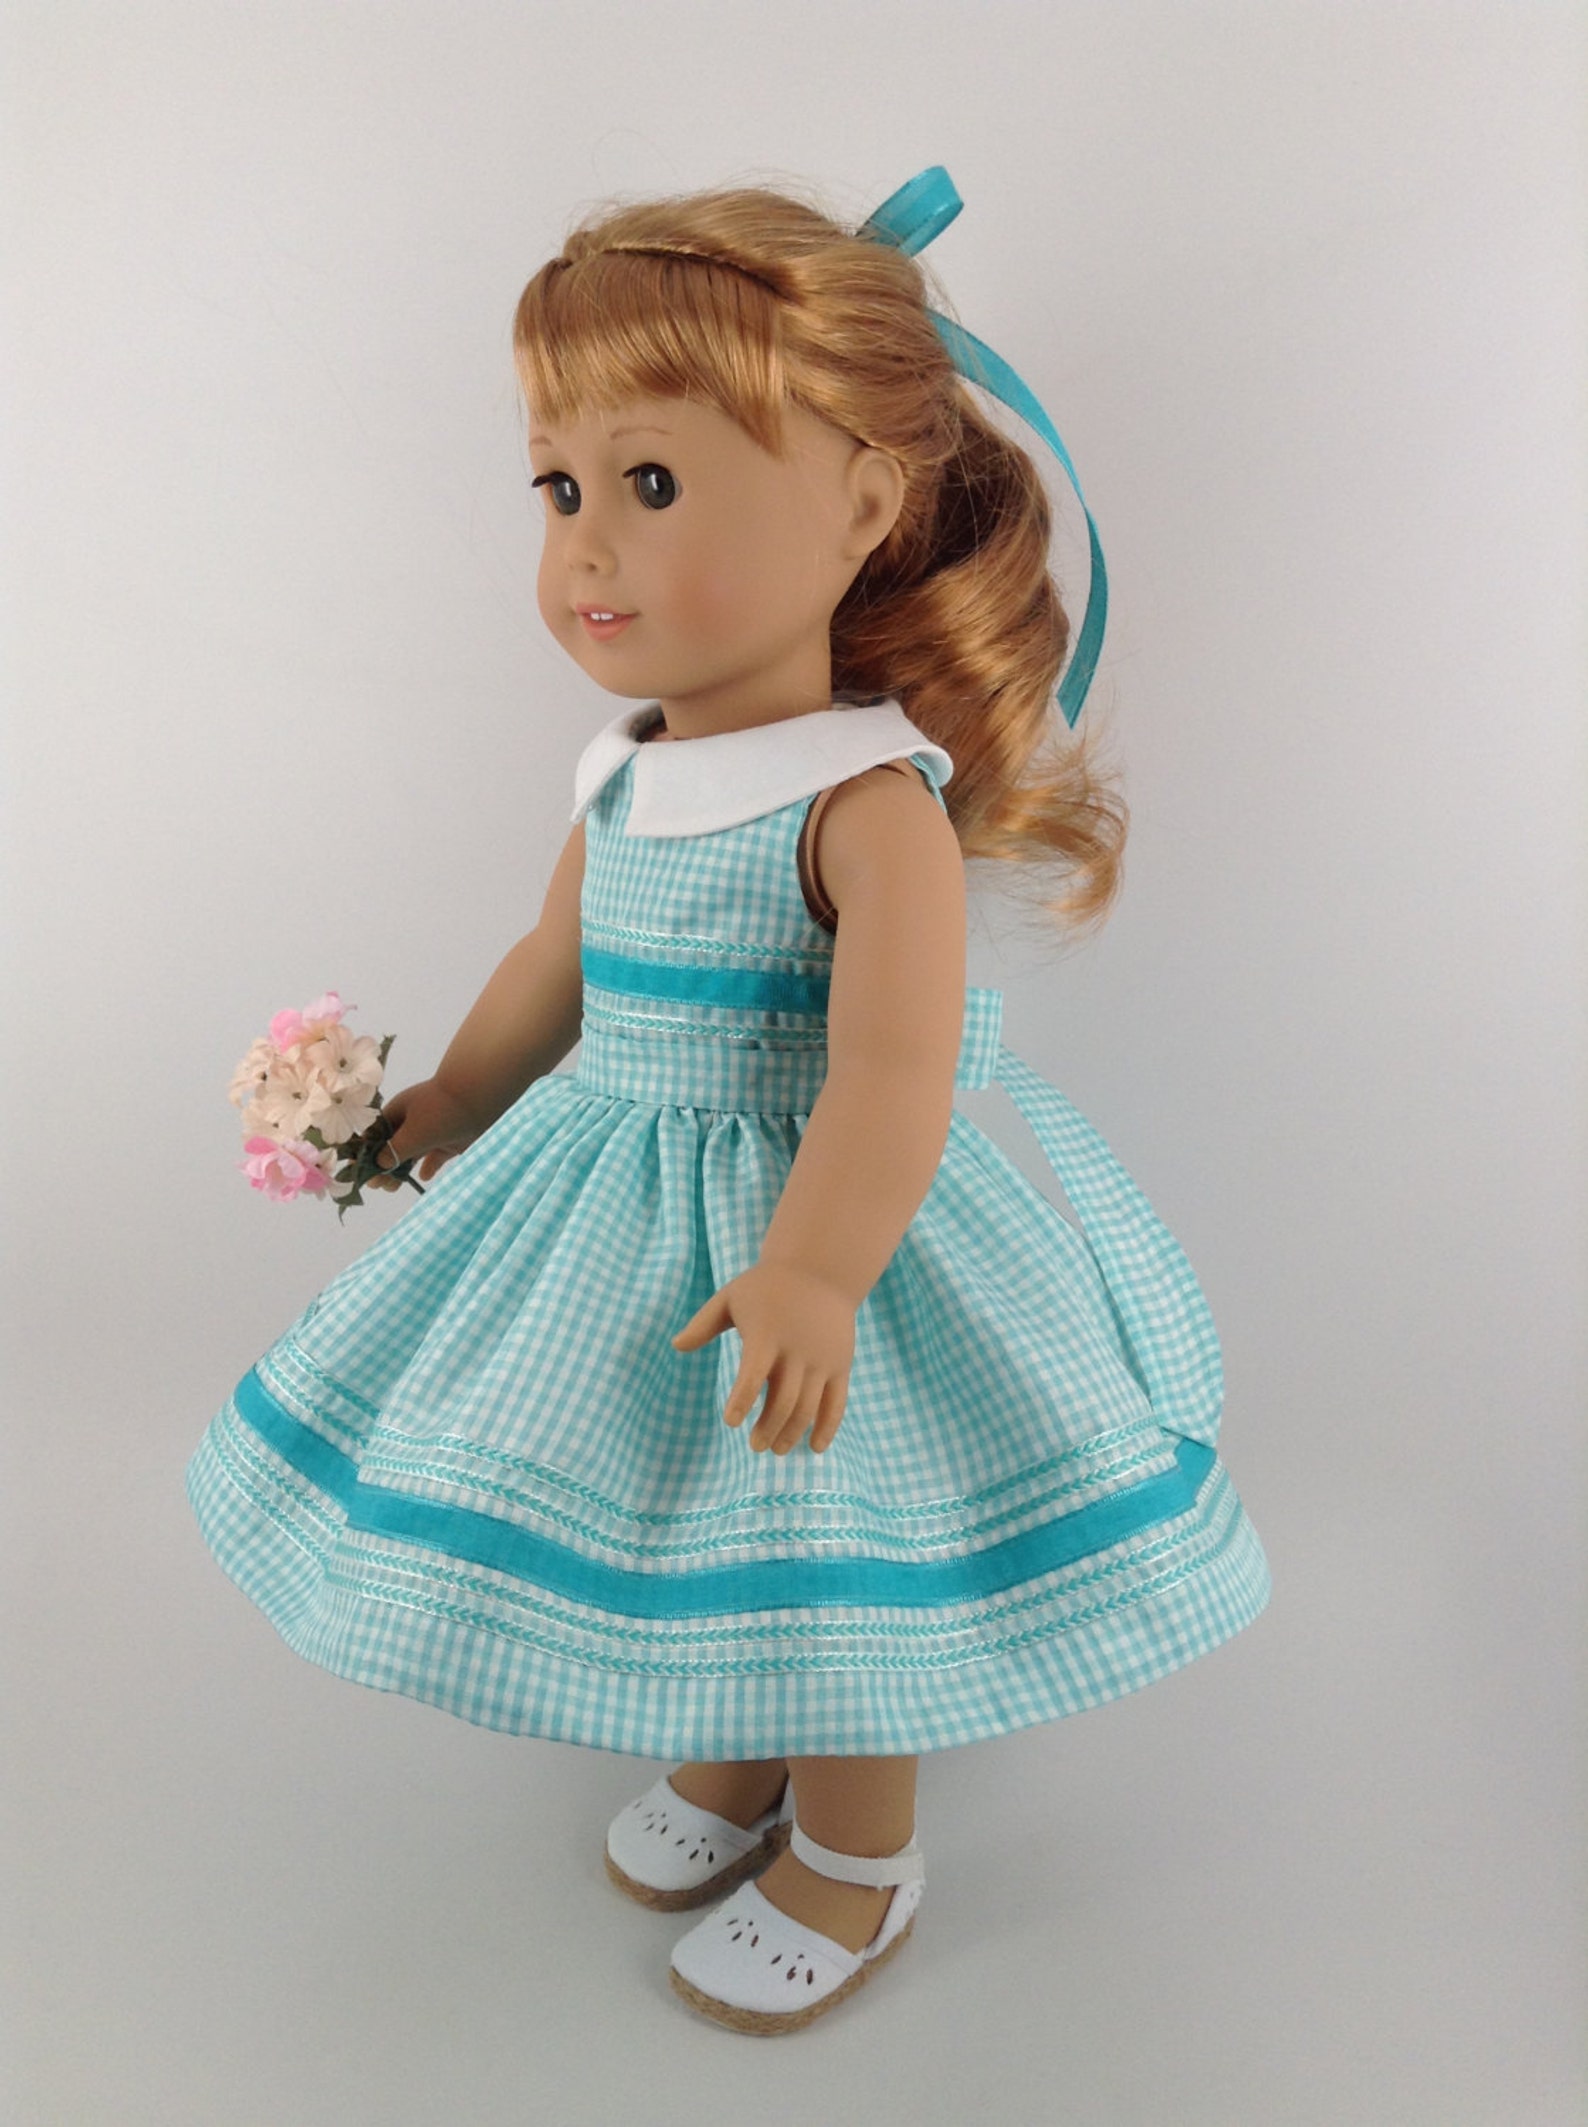 1950-s-american-girl-18-inch-doll-clothes-vintage-etsy